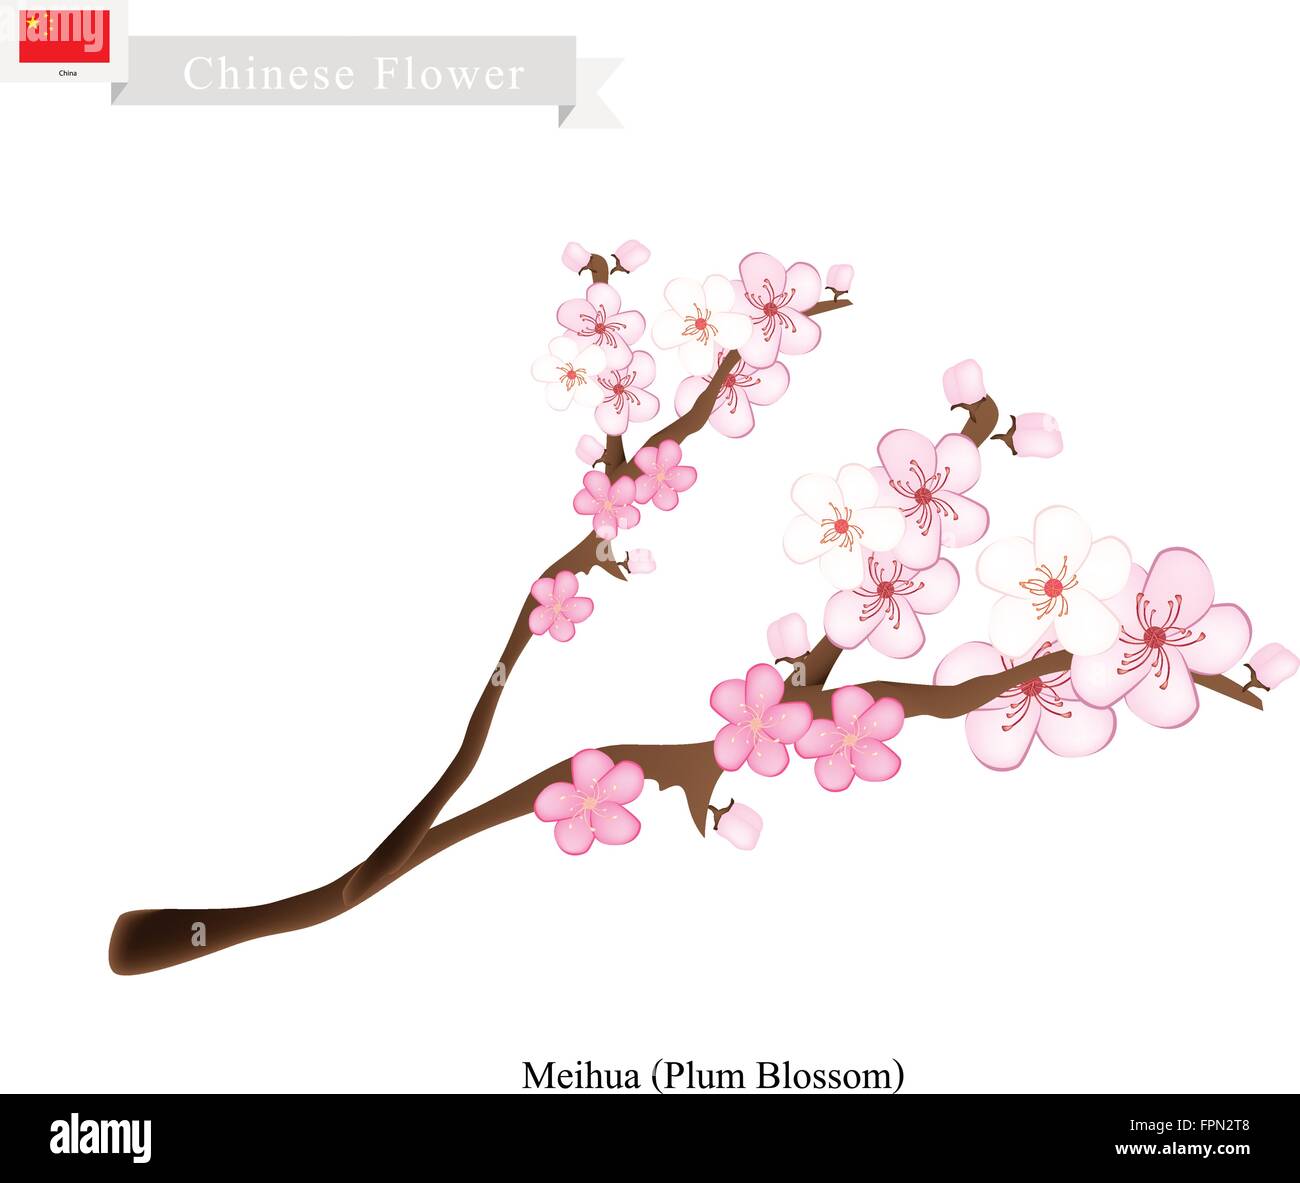 China Flower, Illustration of Meihua or Plum Blossom. One of Most Popular Flower in China. Stock Vector